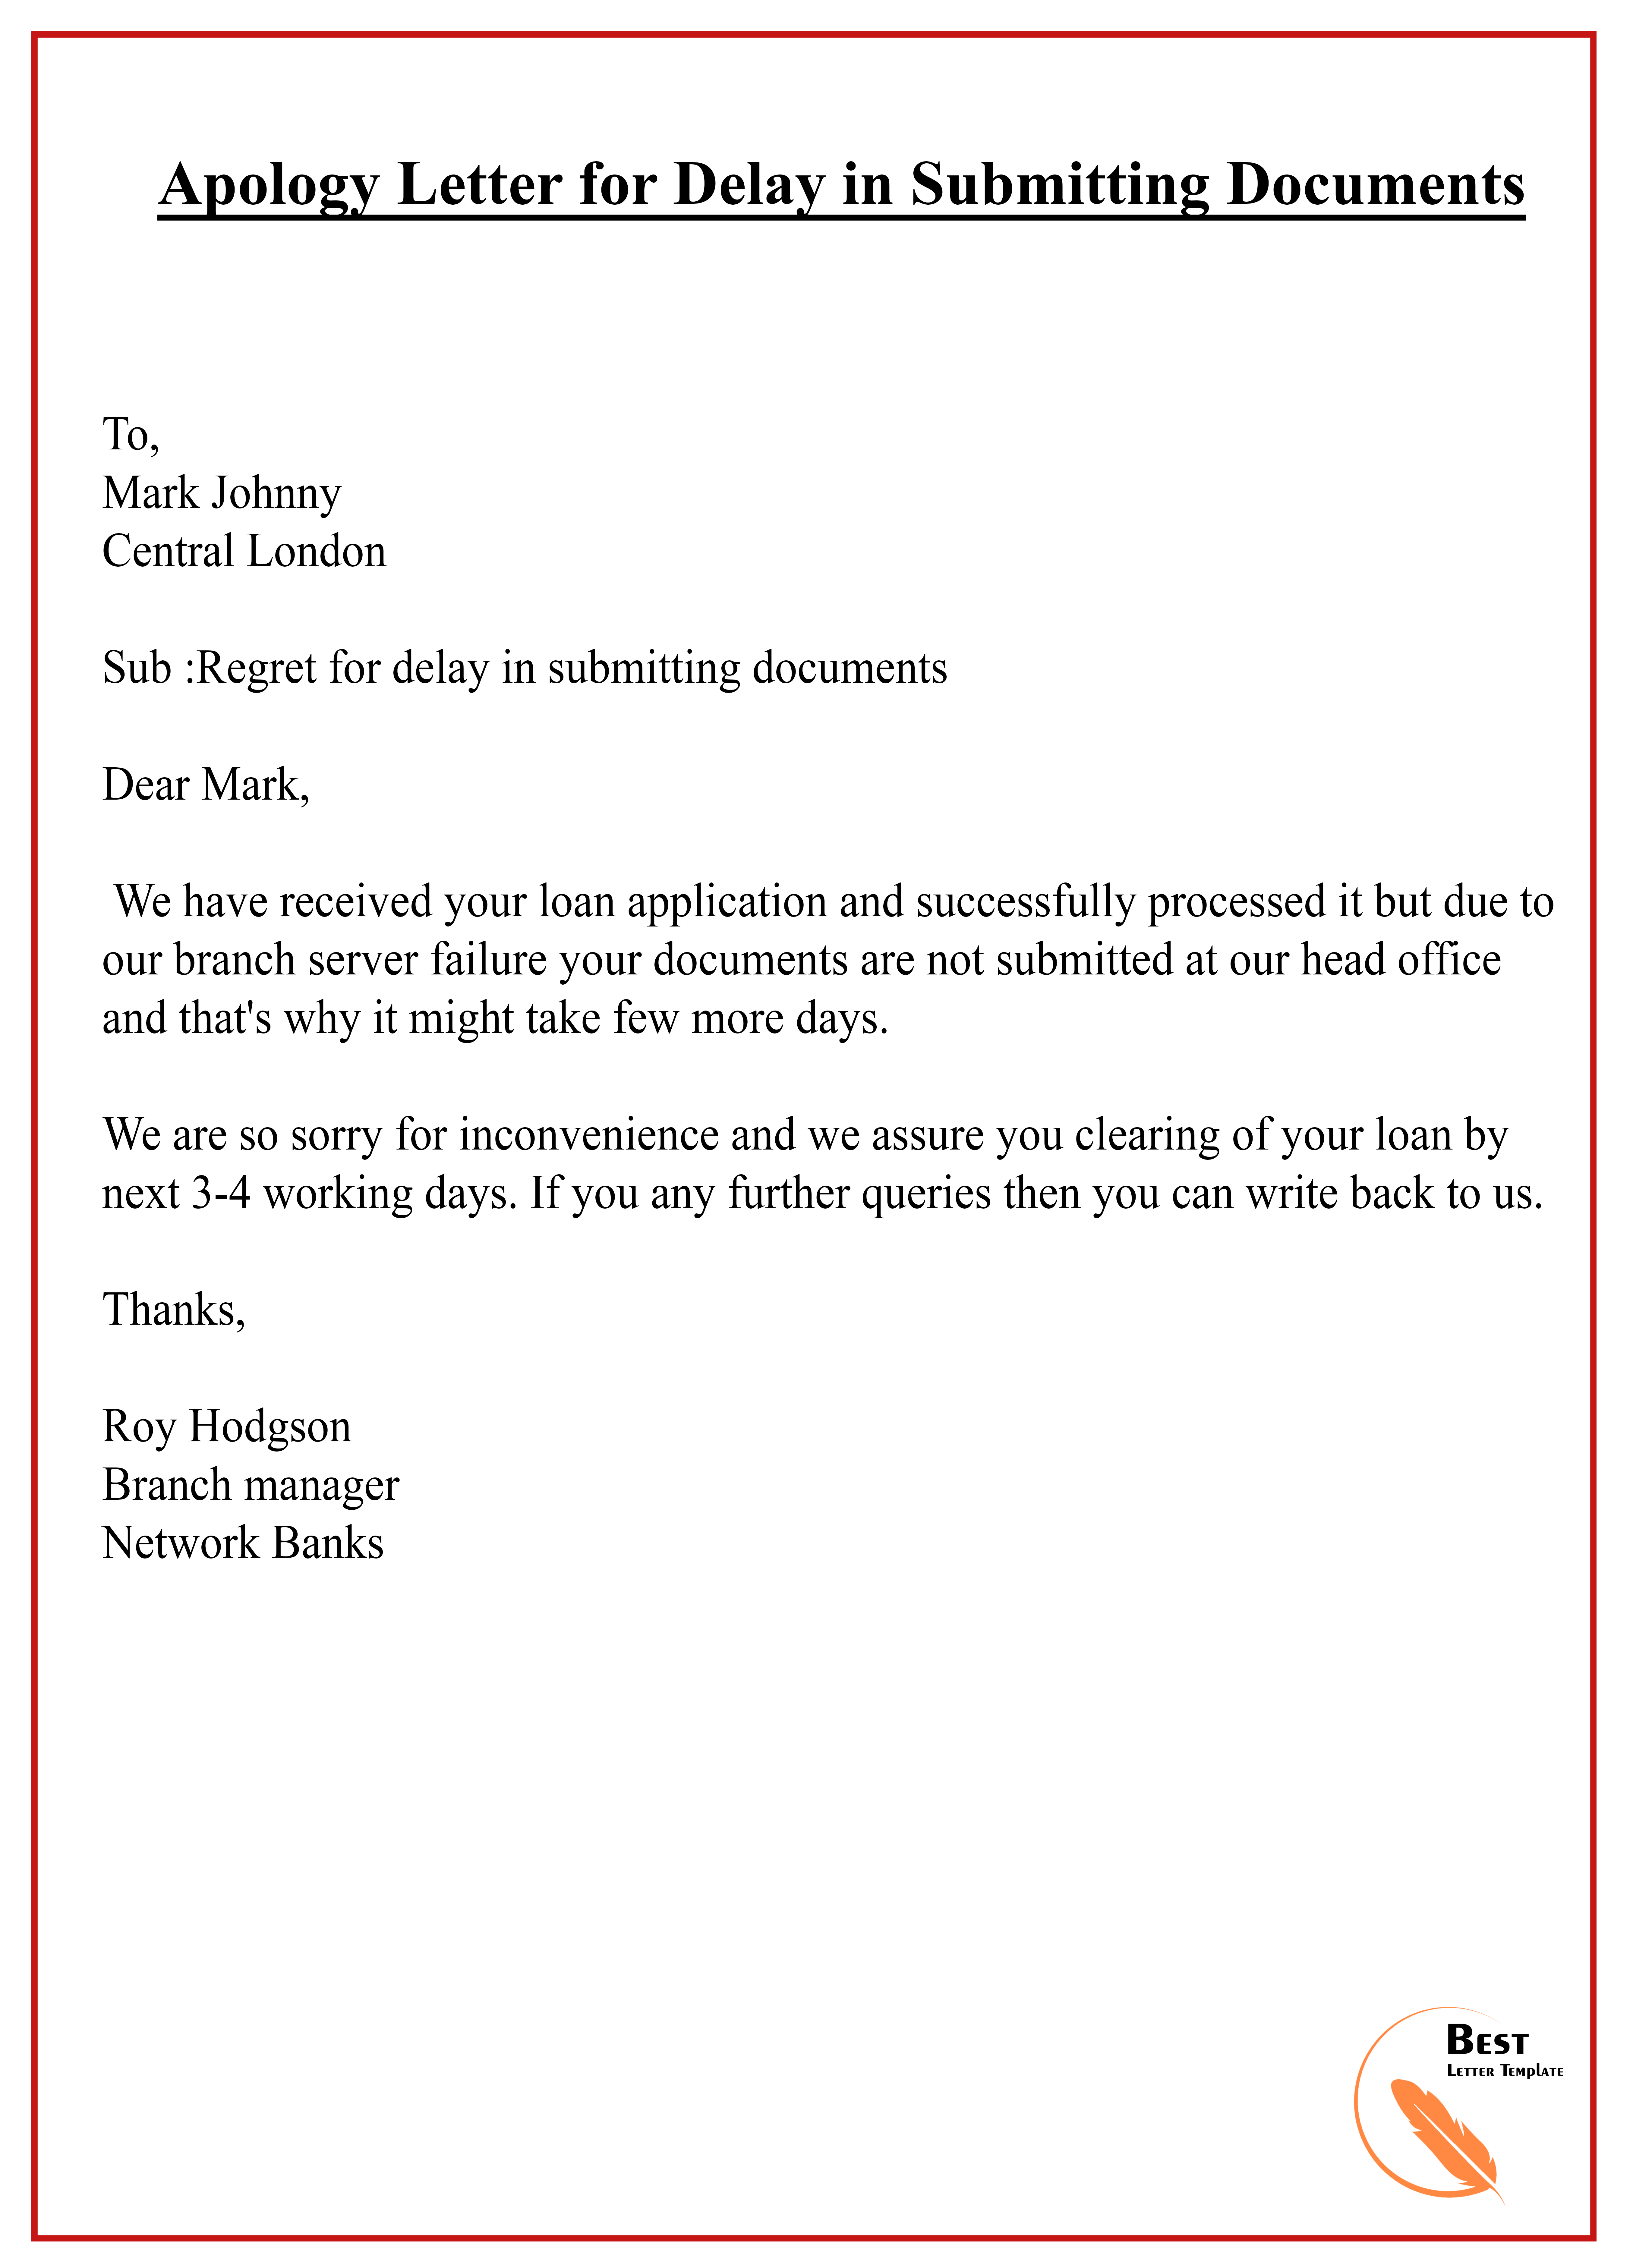 Apology Letter For Delay In Shipment Word Amp Excel Templates